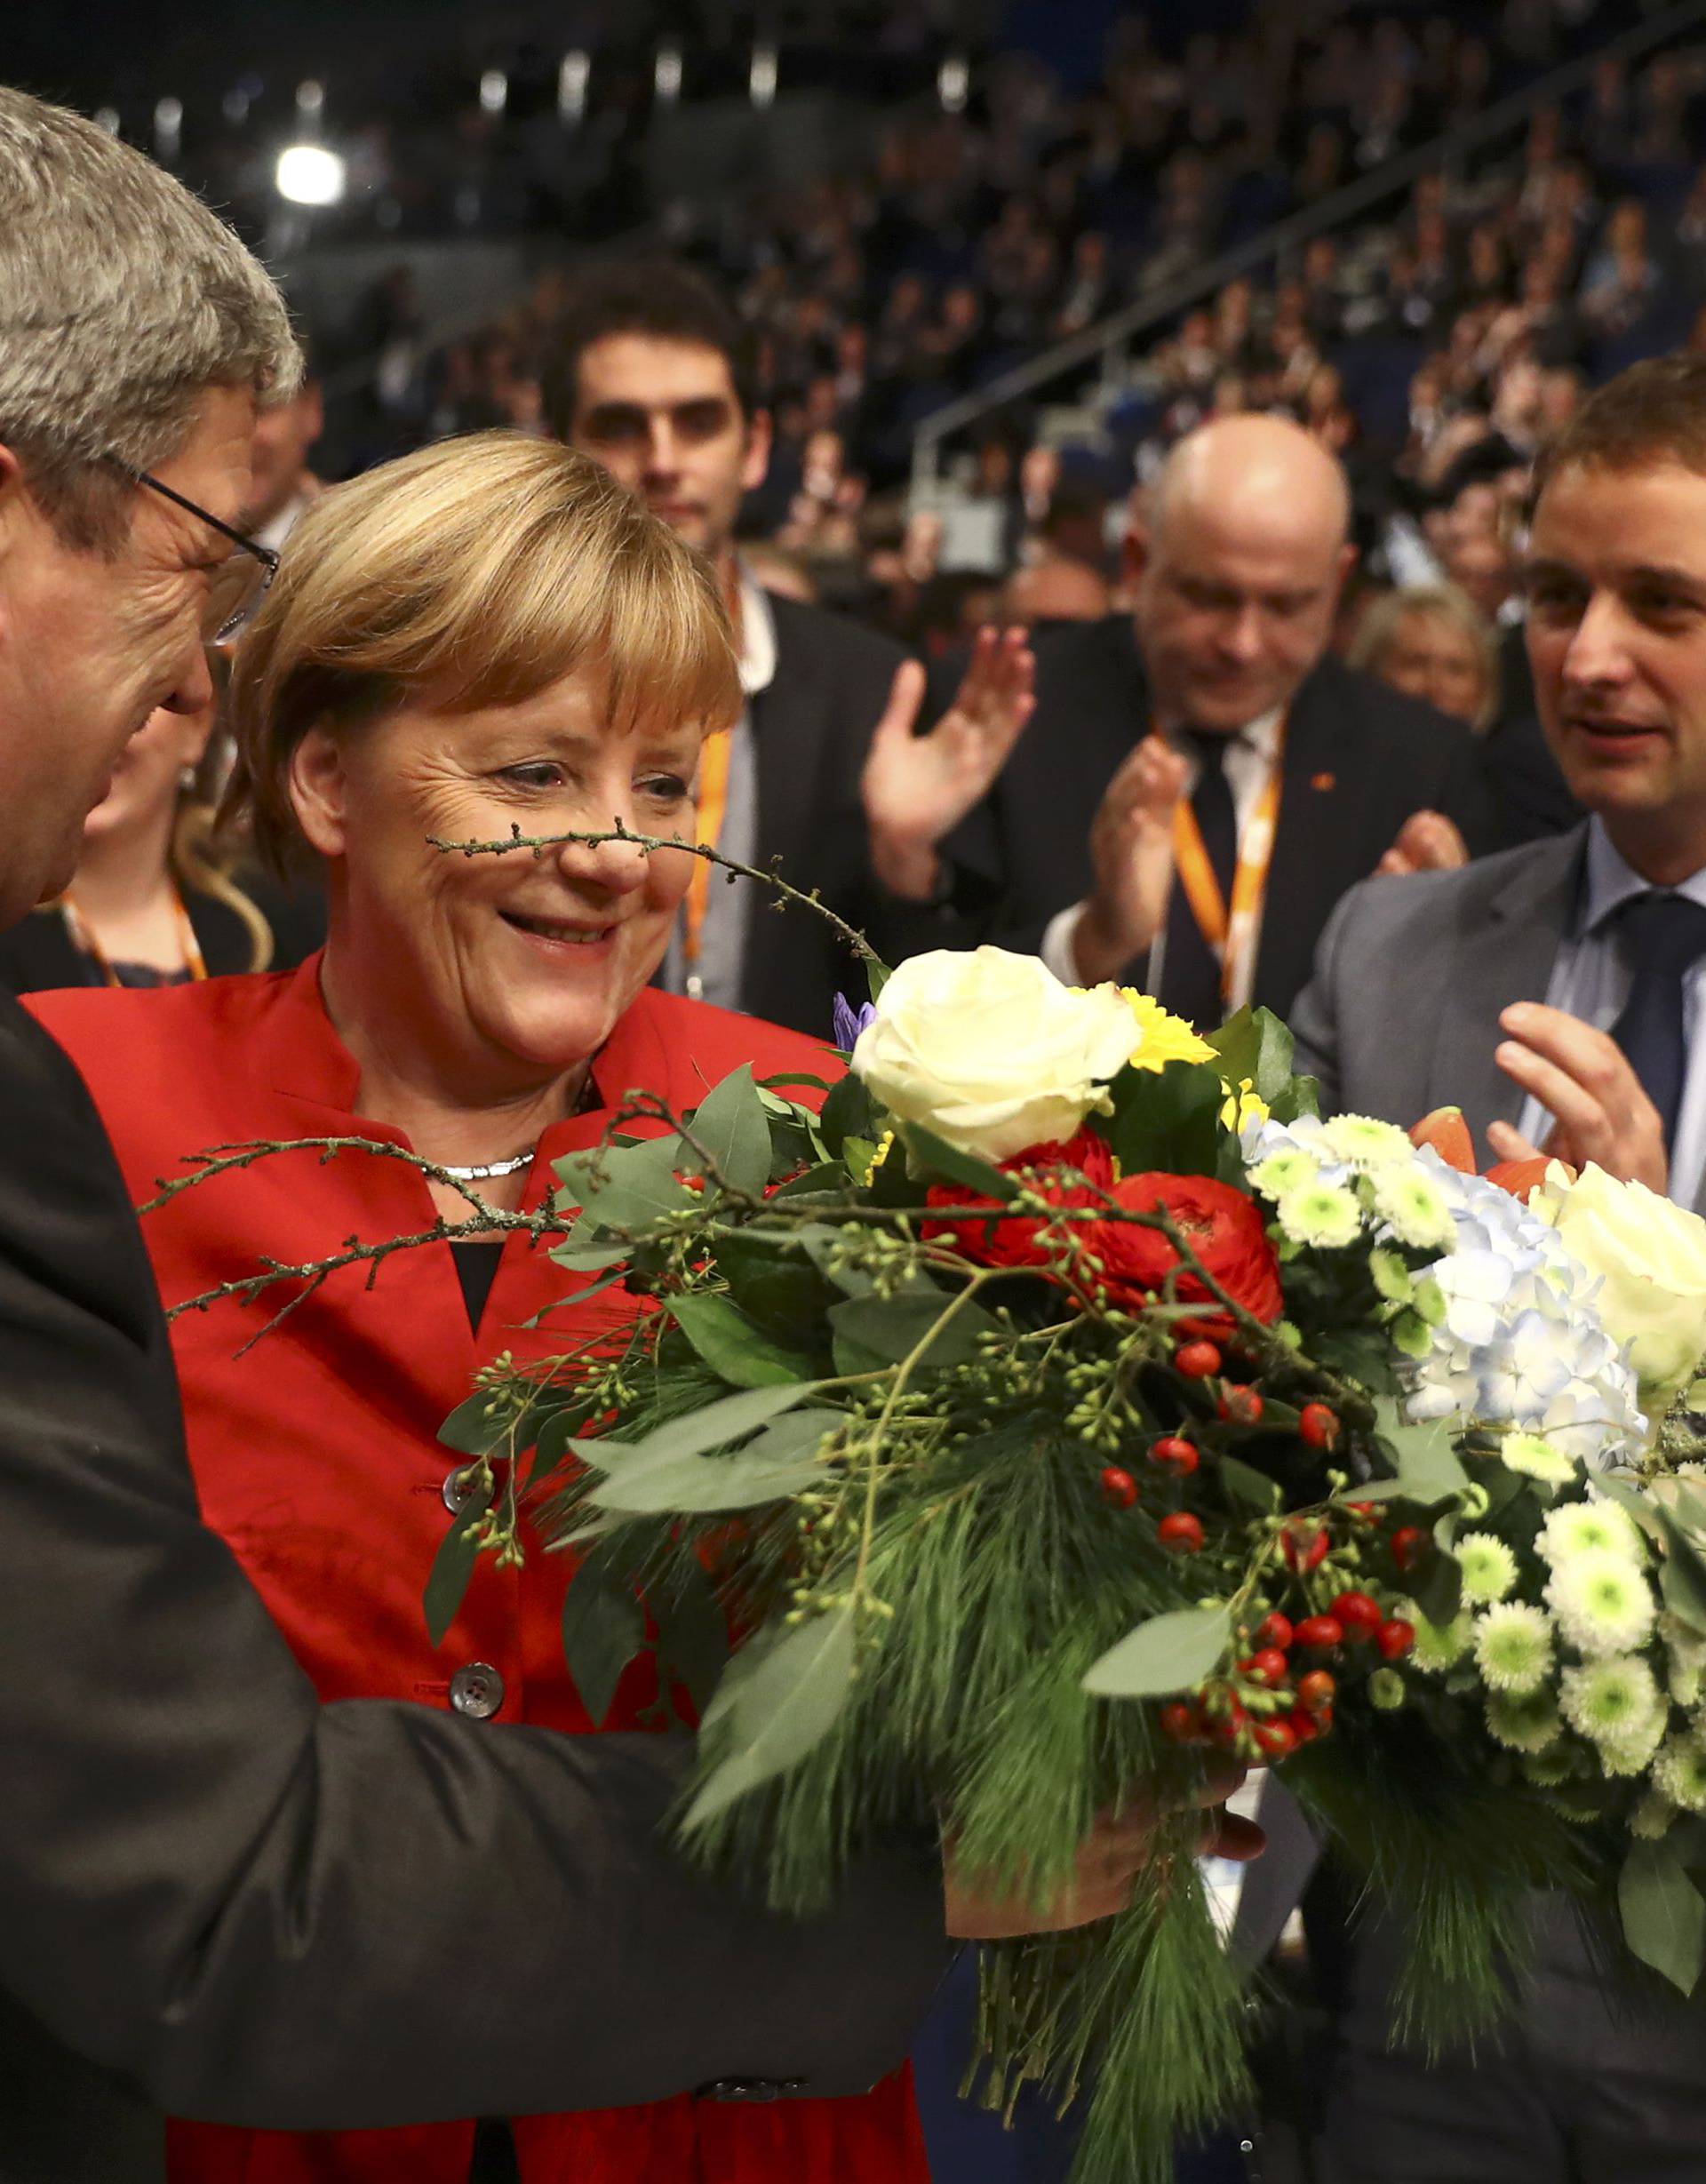 German Chancellor and leader of the conservative CDU Merkel receives flowers after she was re-elected as chairwoman at the CDU party convention in Essen